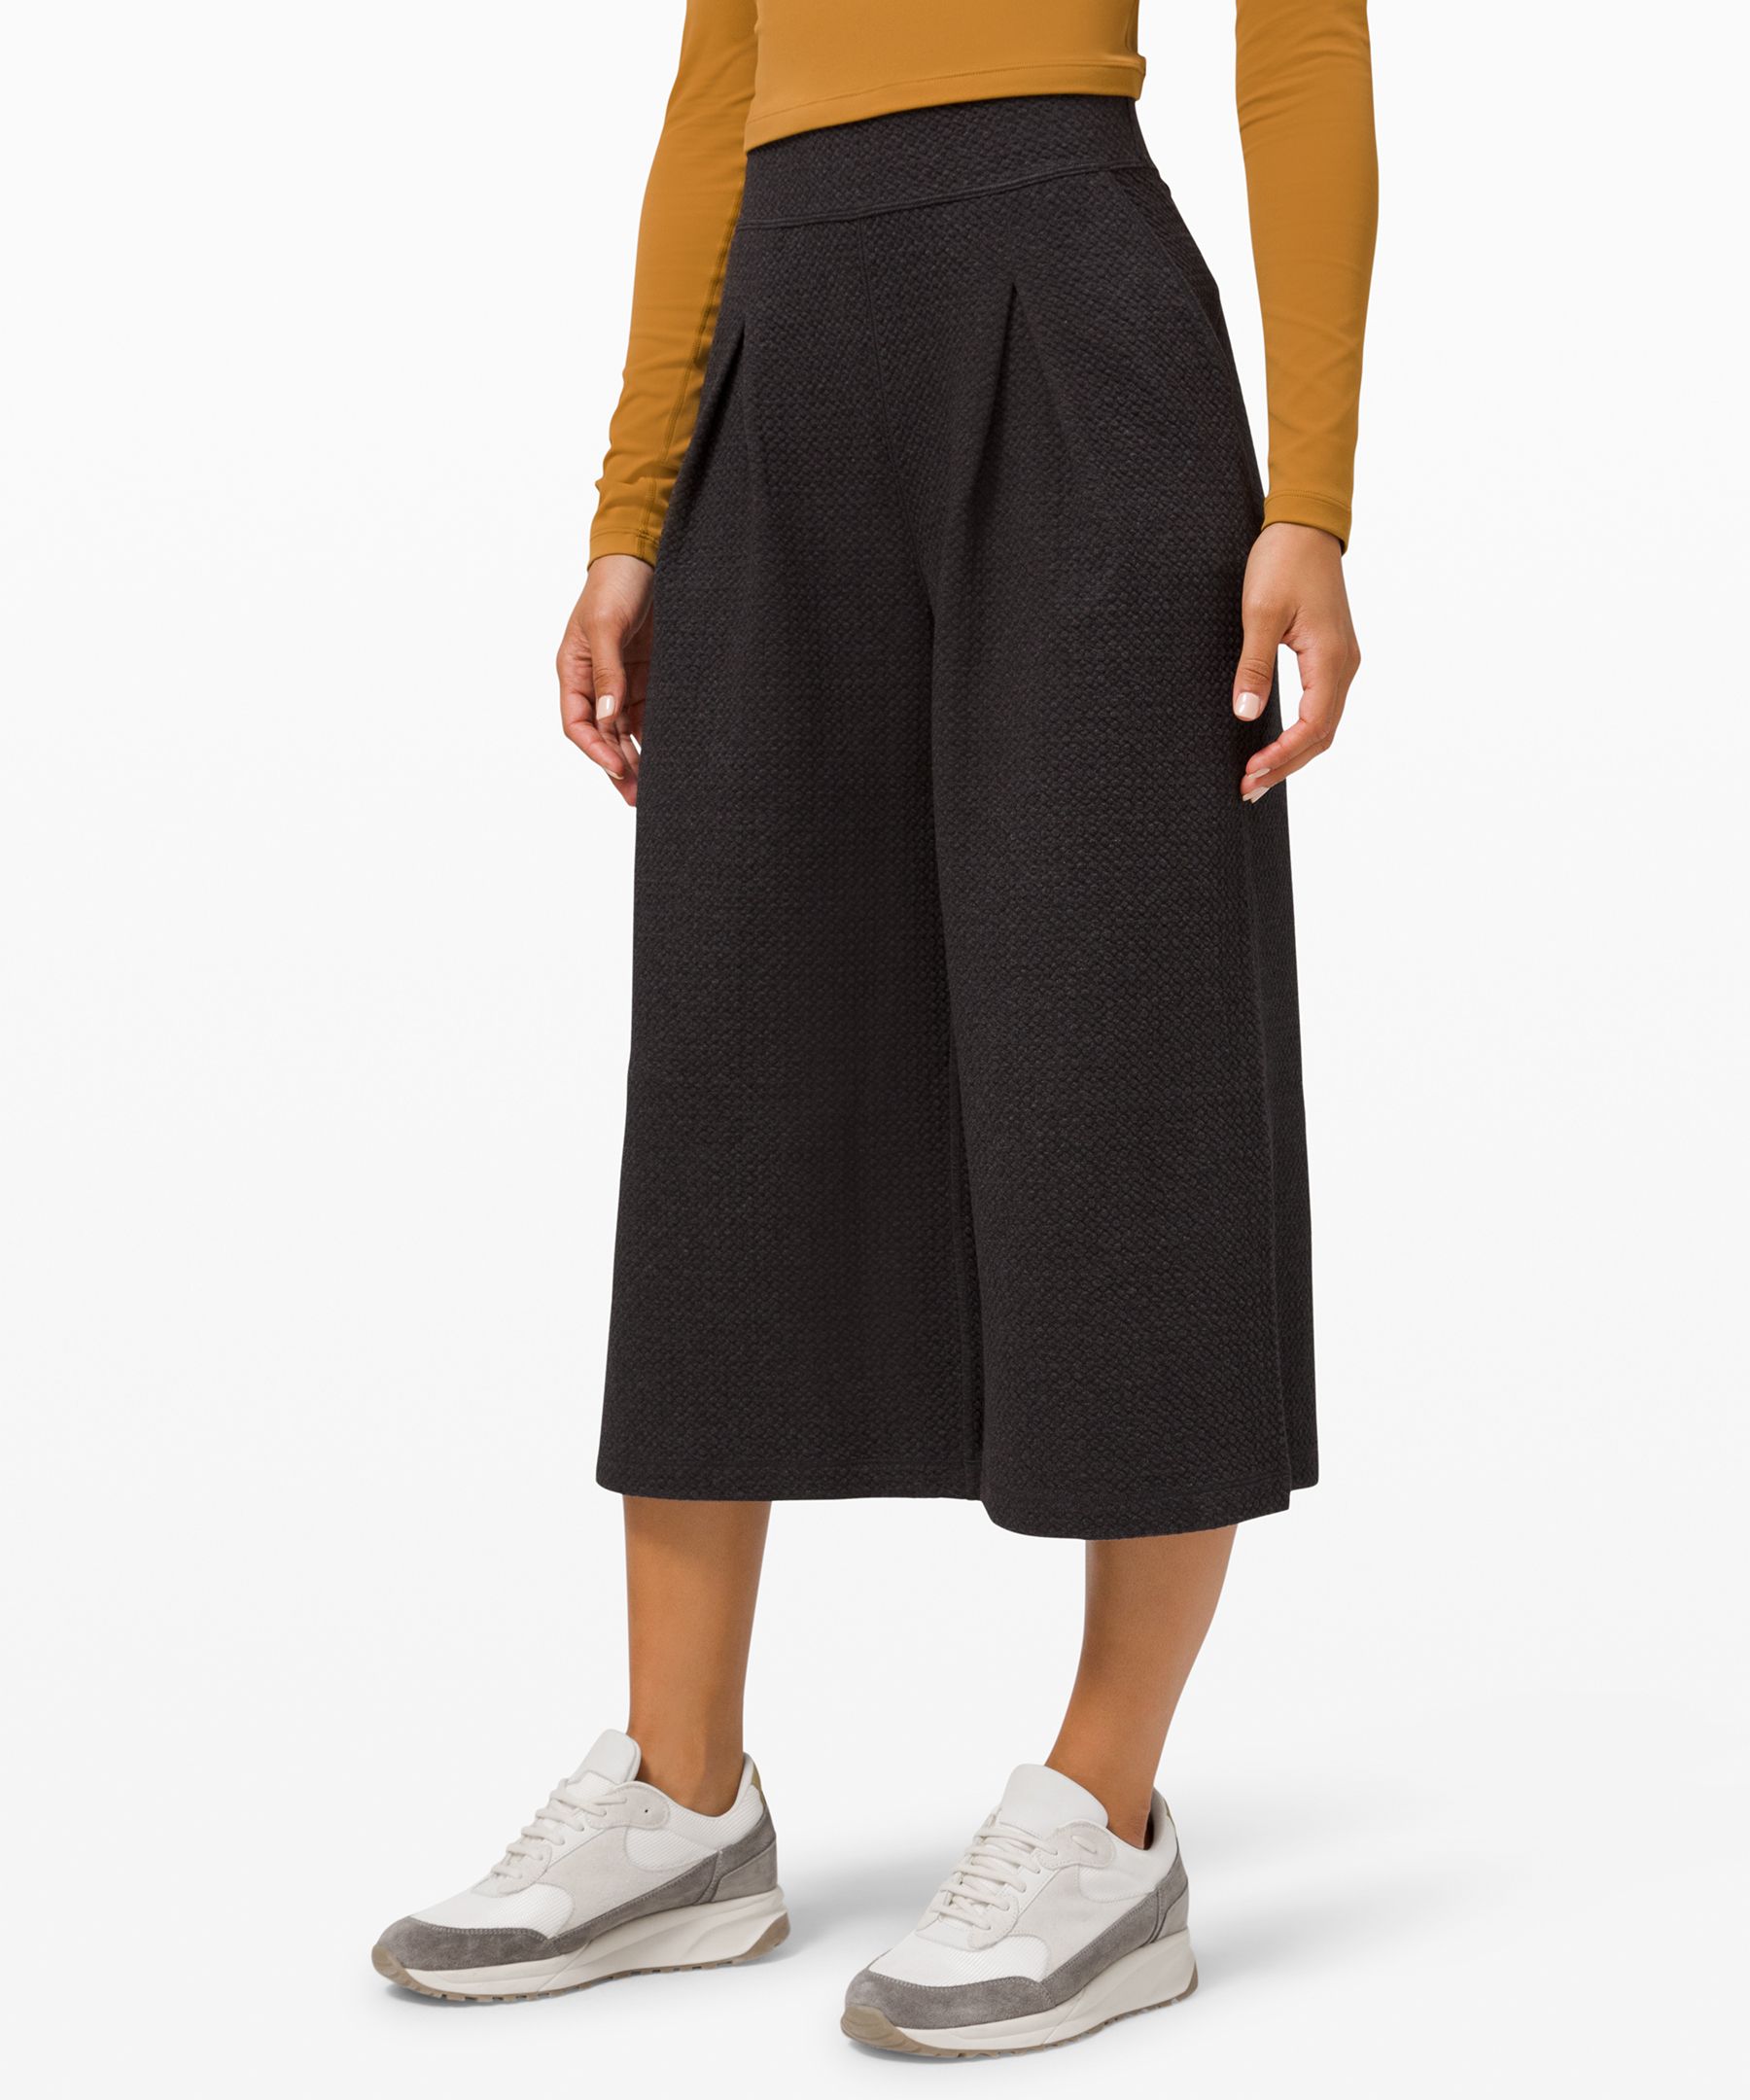 Lululemon Can You Feel The Pleat Crop In Black